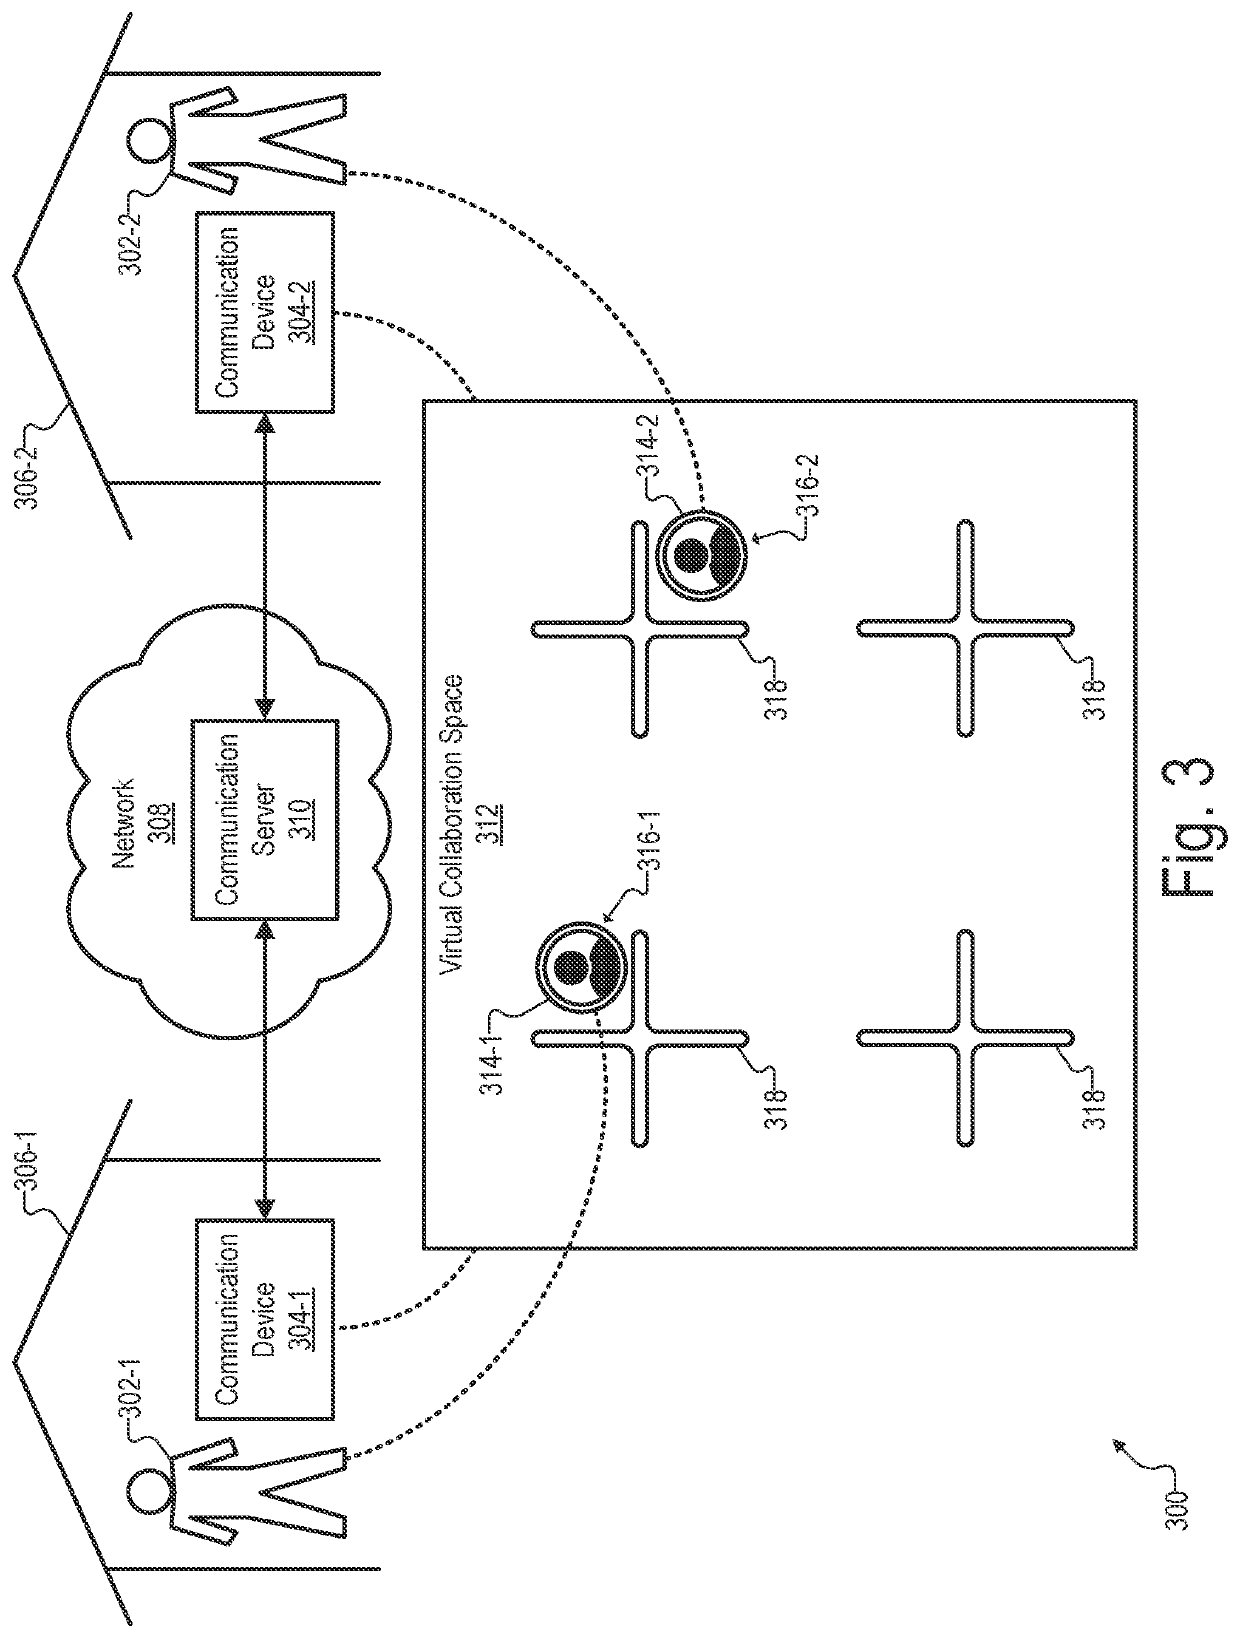 User-definable sound boundaries to regulate audio communication within a virtual collaboration space